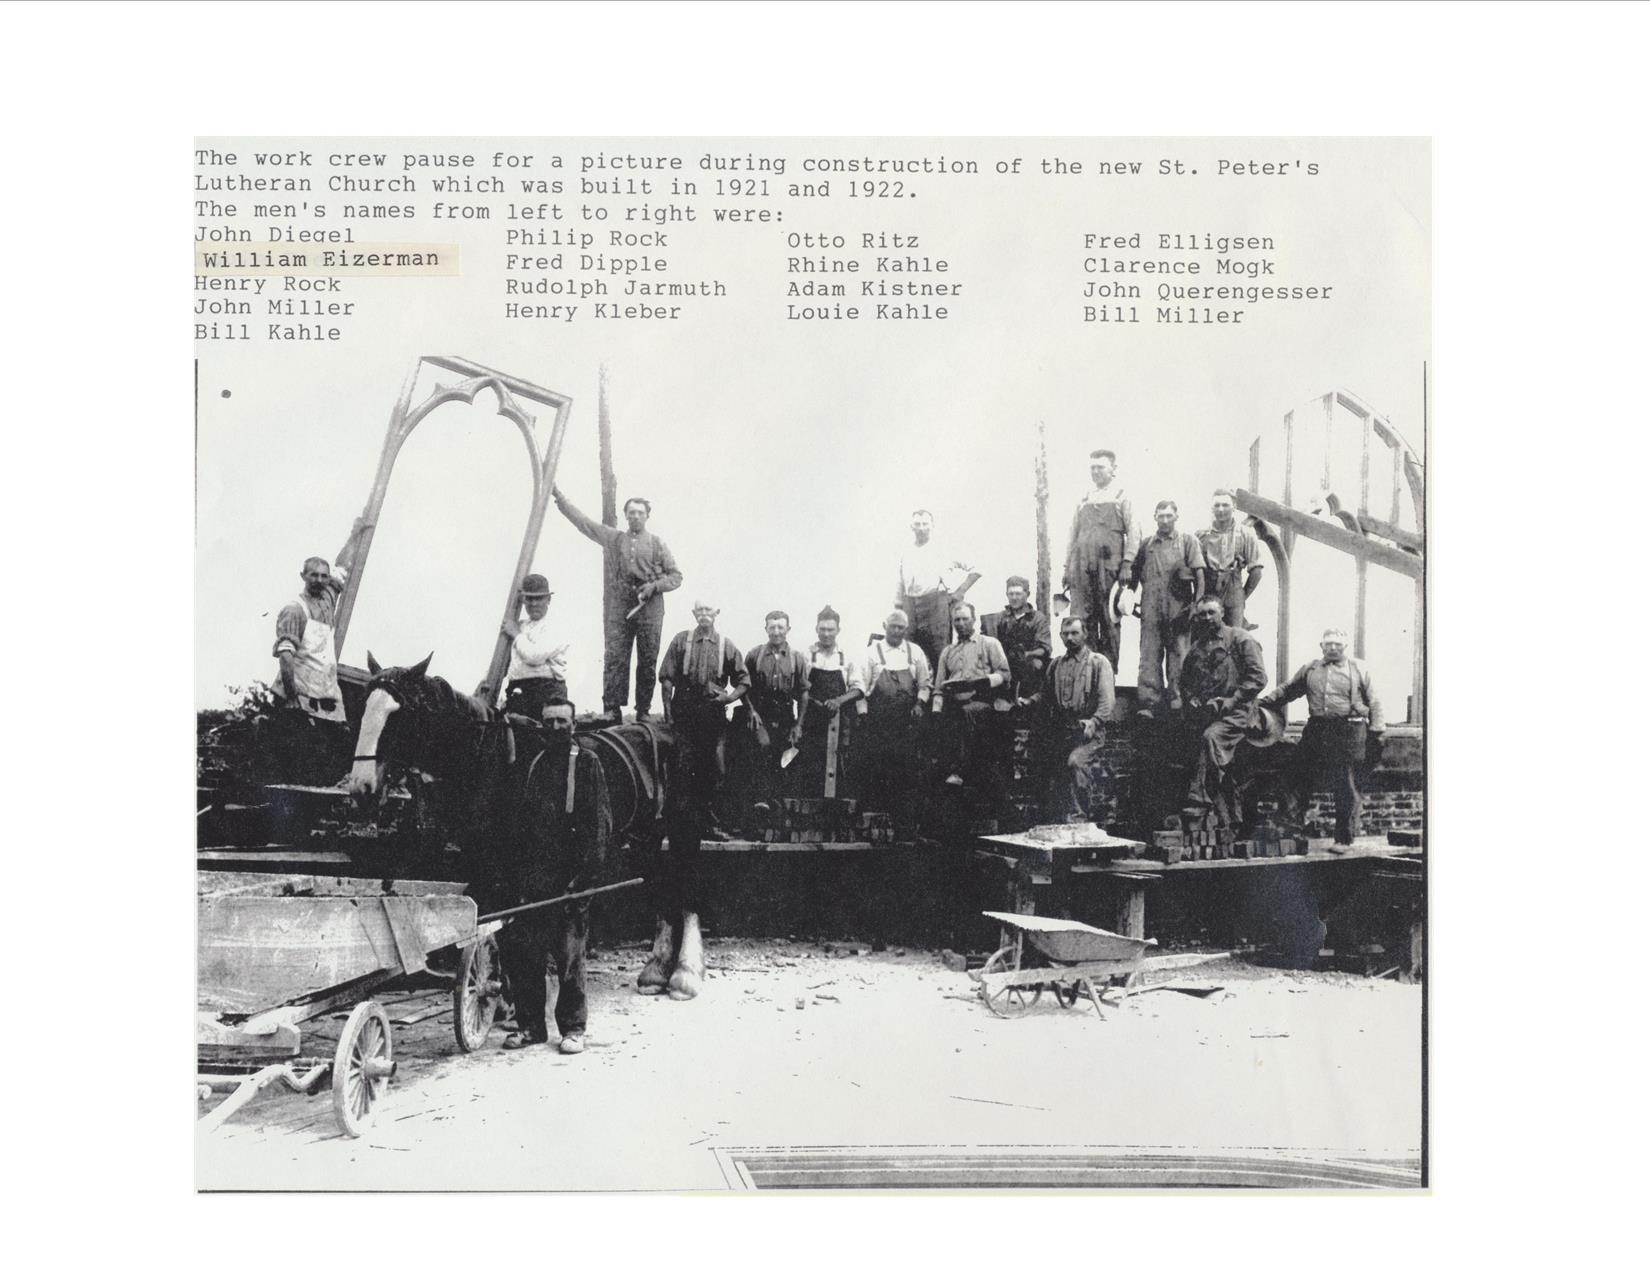 17 men posed for picture at construction site with a horse, tools and frames of what will be stained glass windows